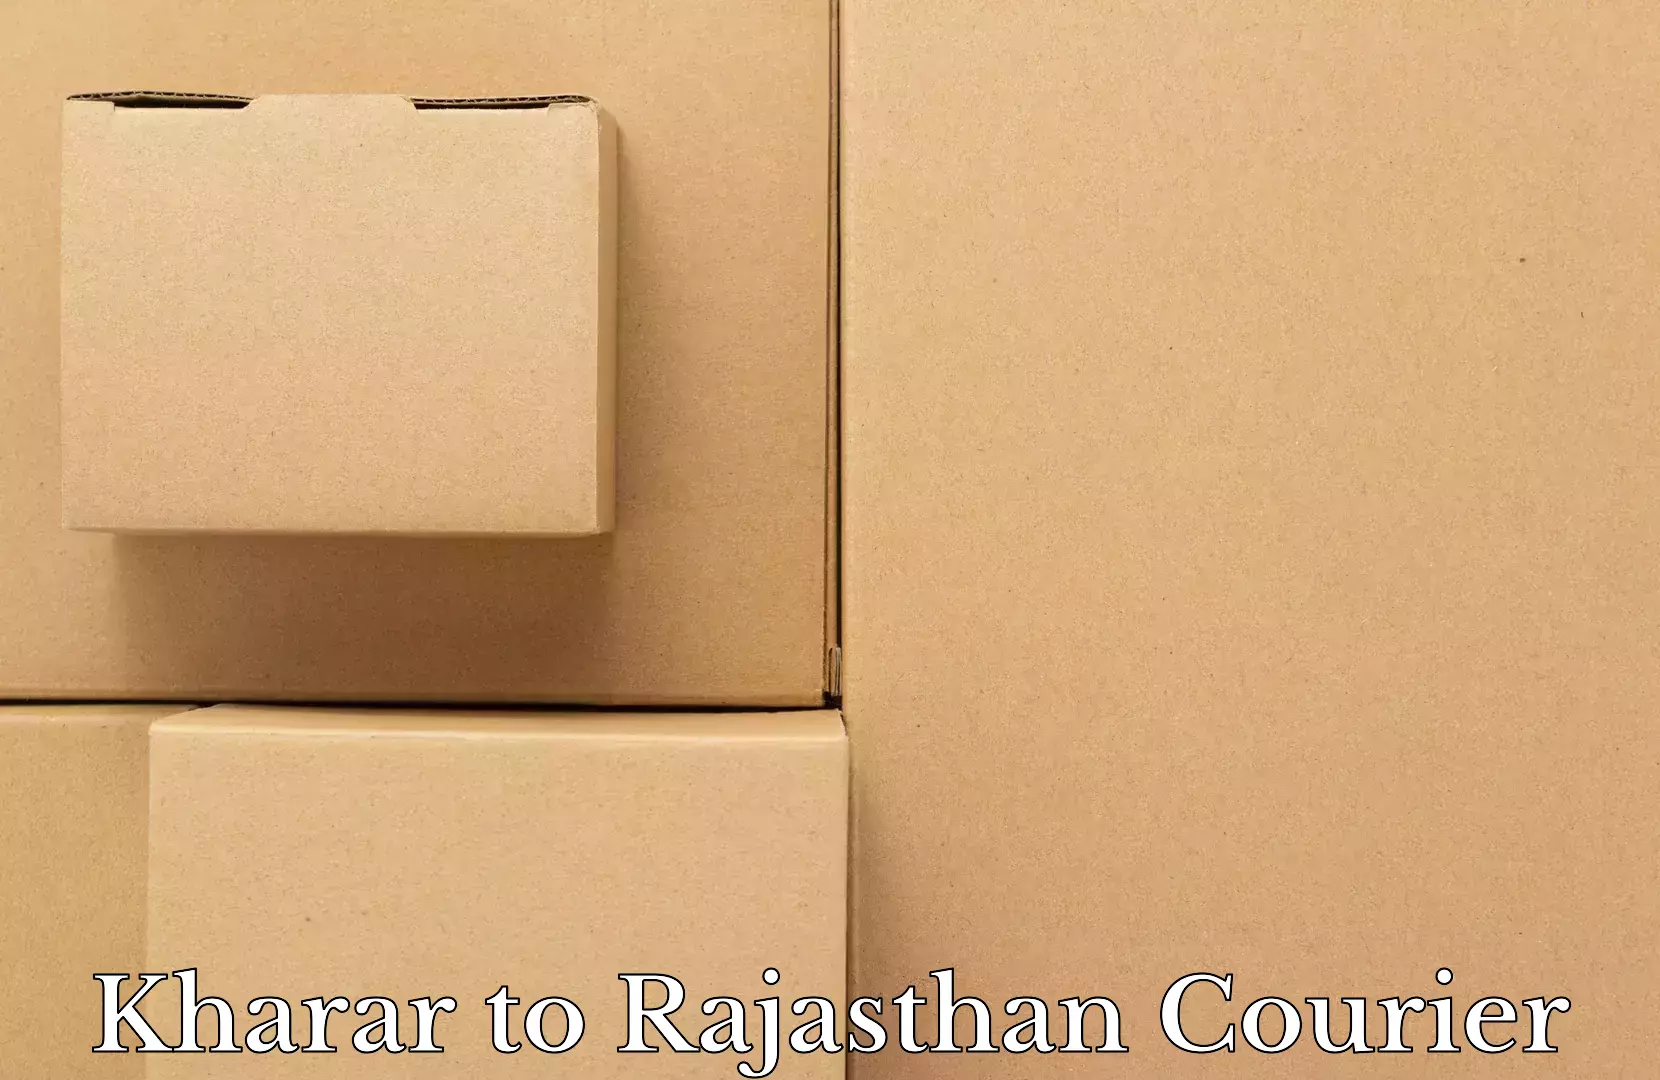 Luggage transport consultancy Kharar to Rajasthan